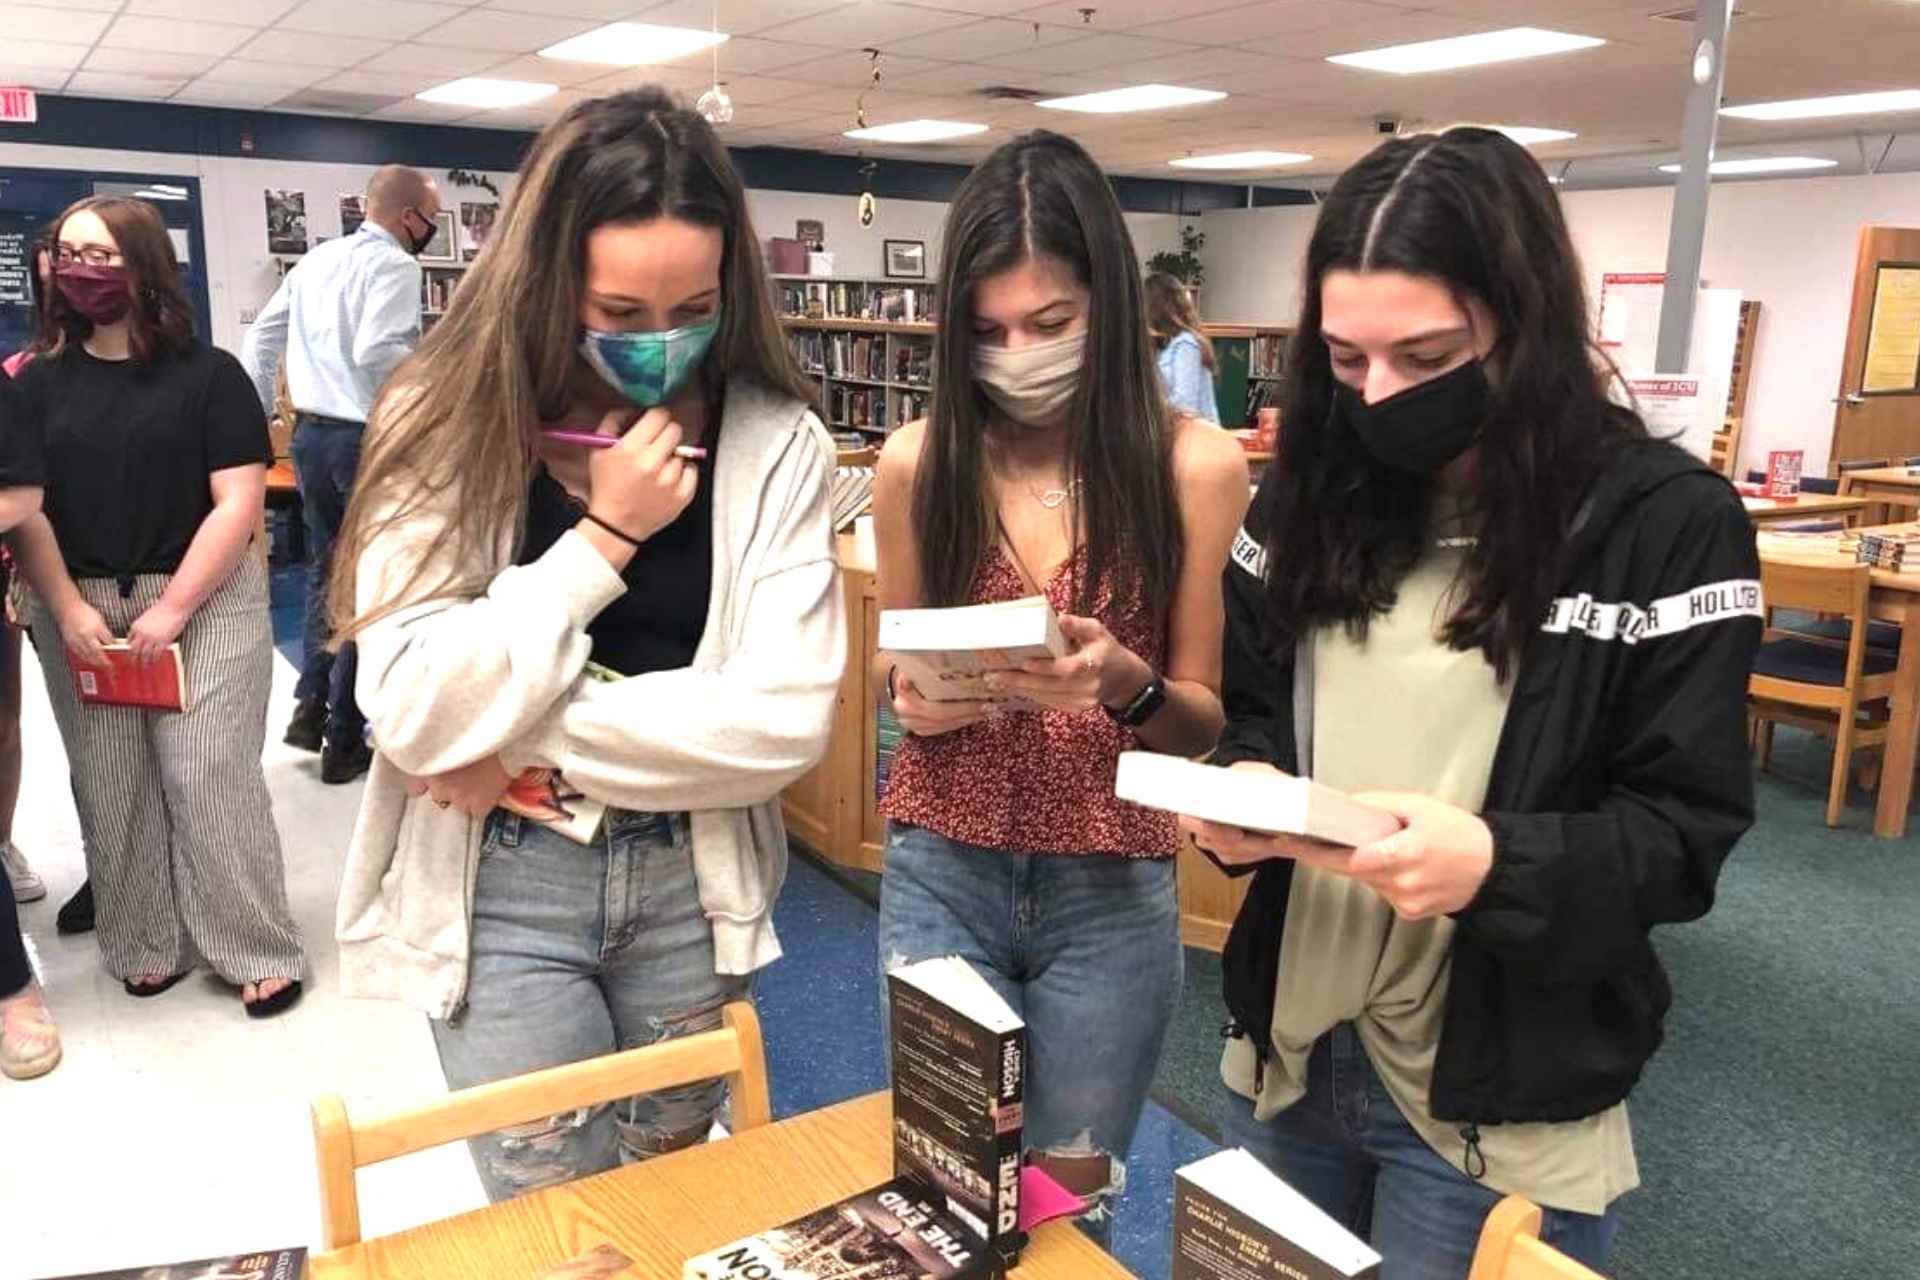 Buckhannon-Upshur High School students Kloey Chapman, Bella Weatherholtz and Olivia McKisic browse books donated by West Virginia Read Aloud during a recent event at the school celebrating School Library Week. More than 1,000 books were donated to the school so students could select the perfect book to help rekindle the love of reading.